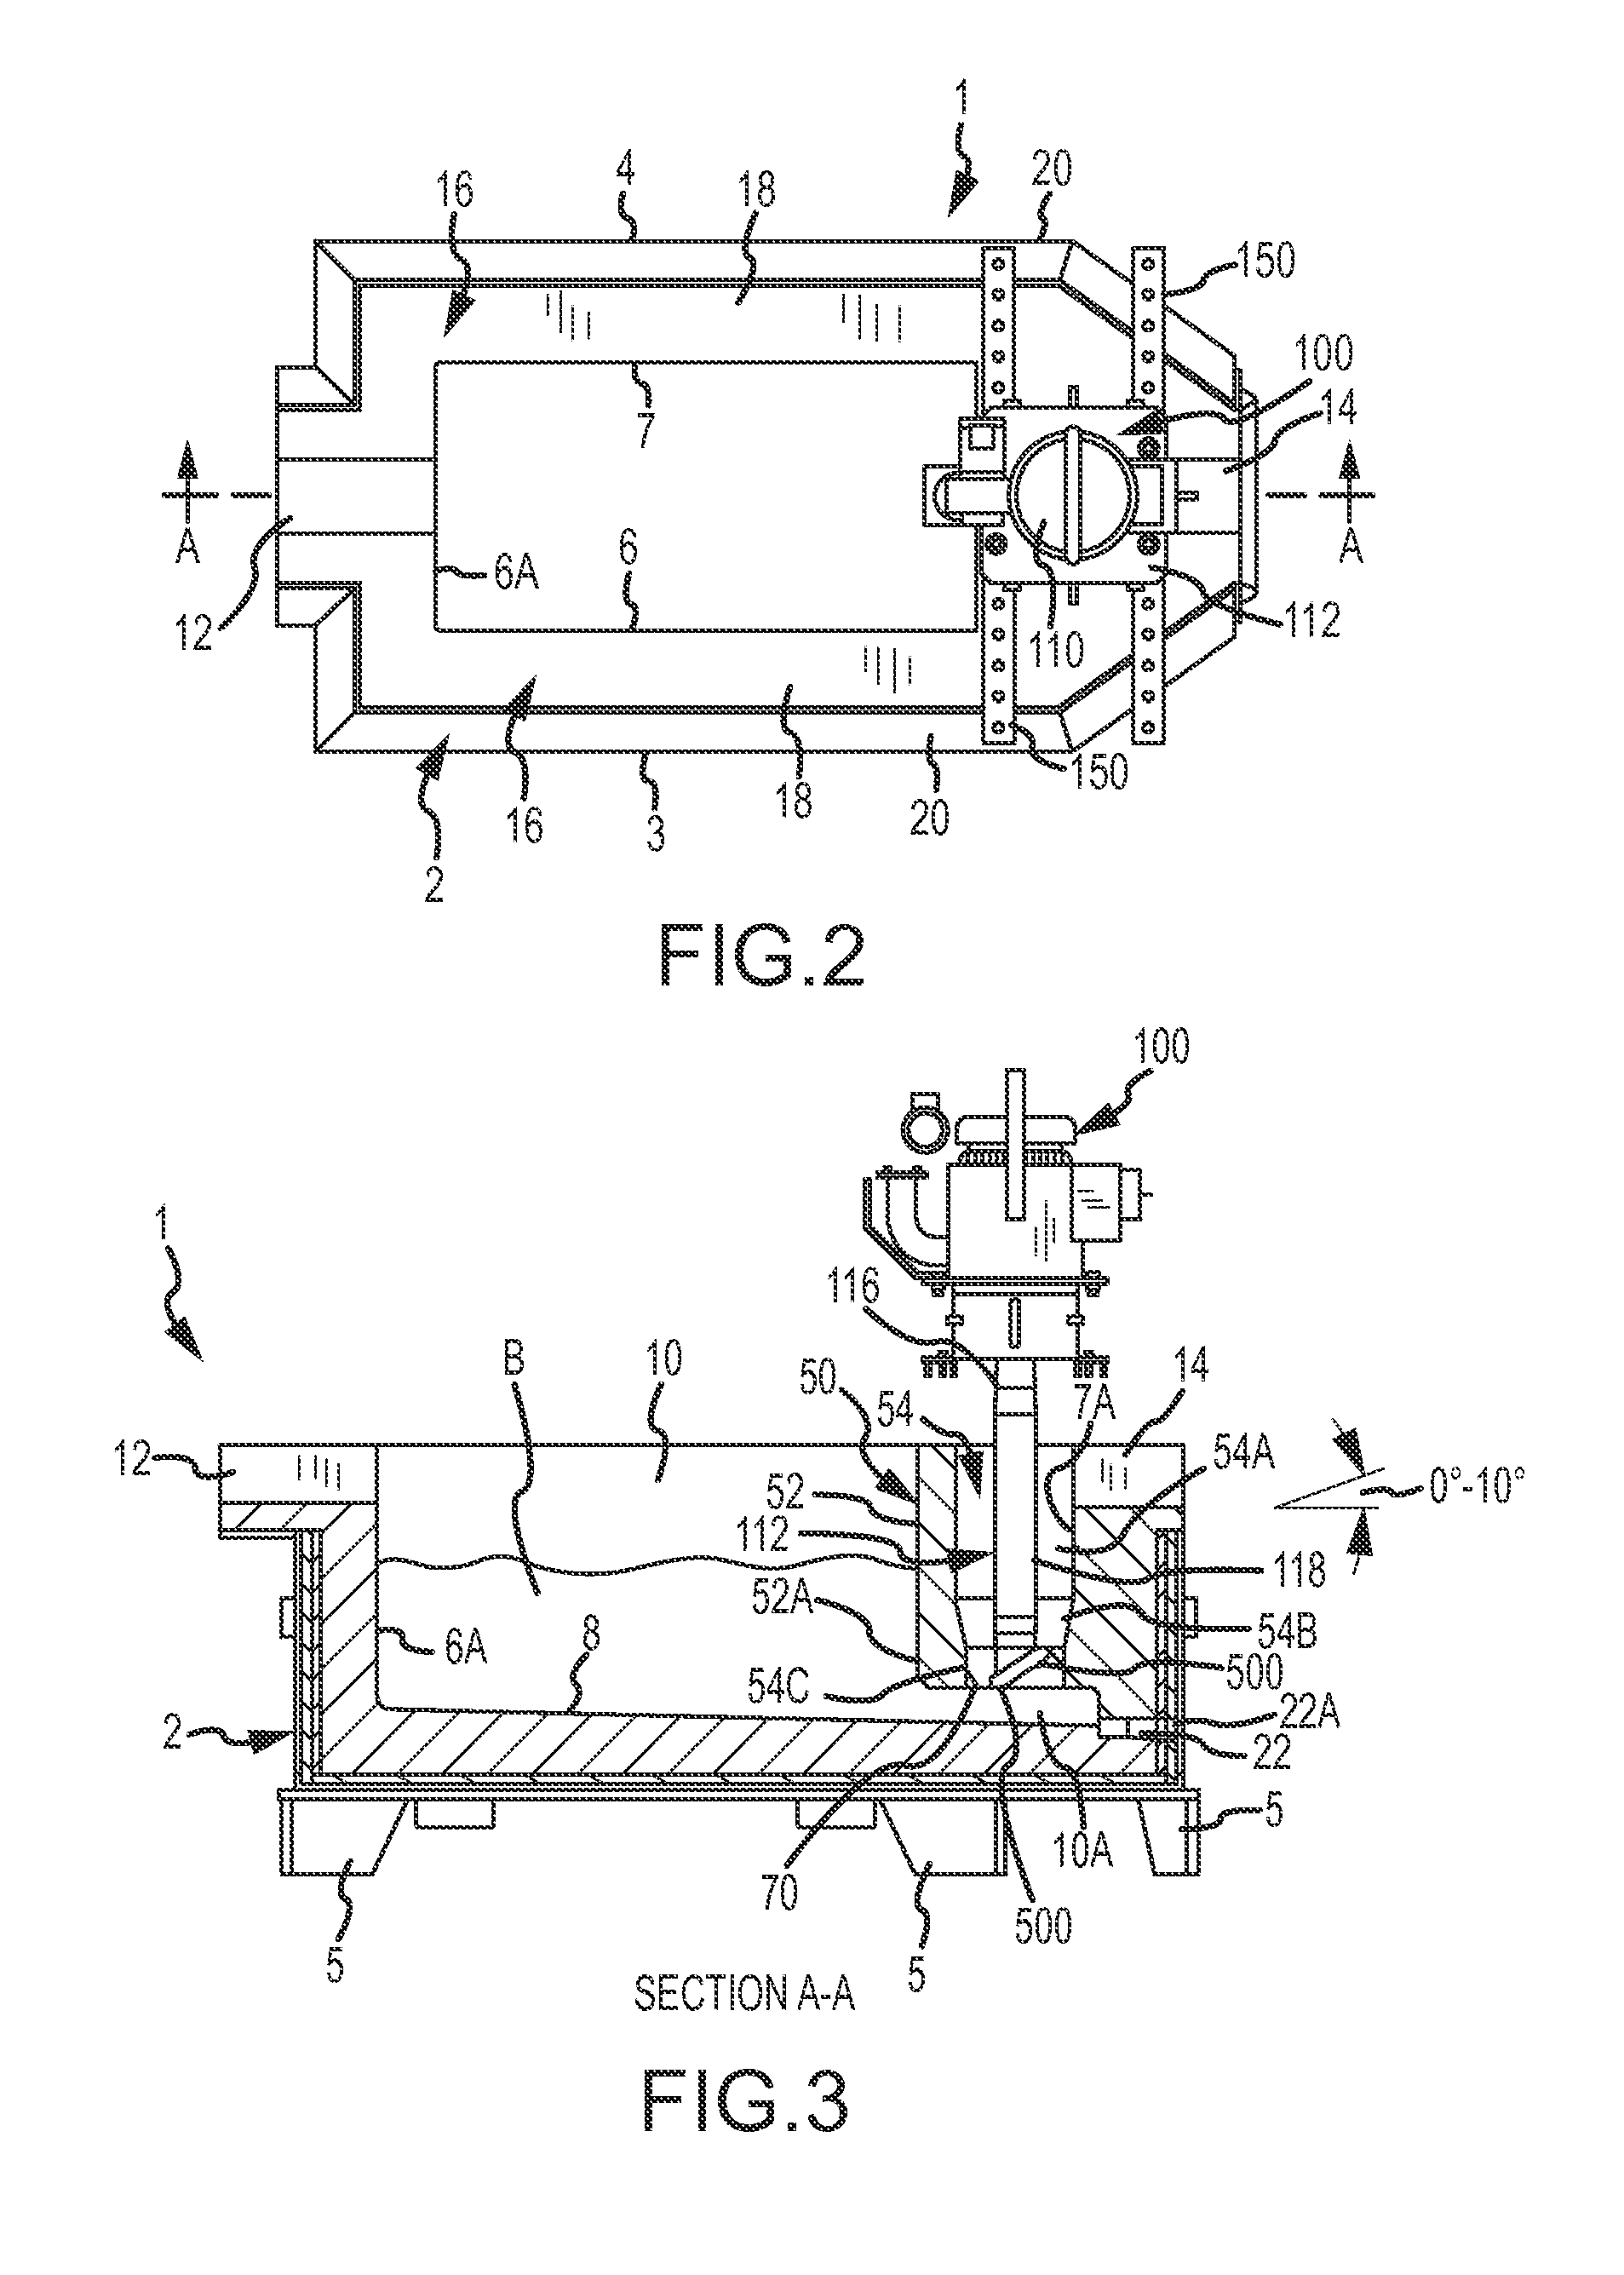 Molten metal transfer and degassing system